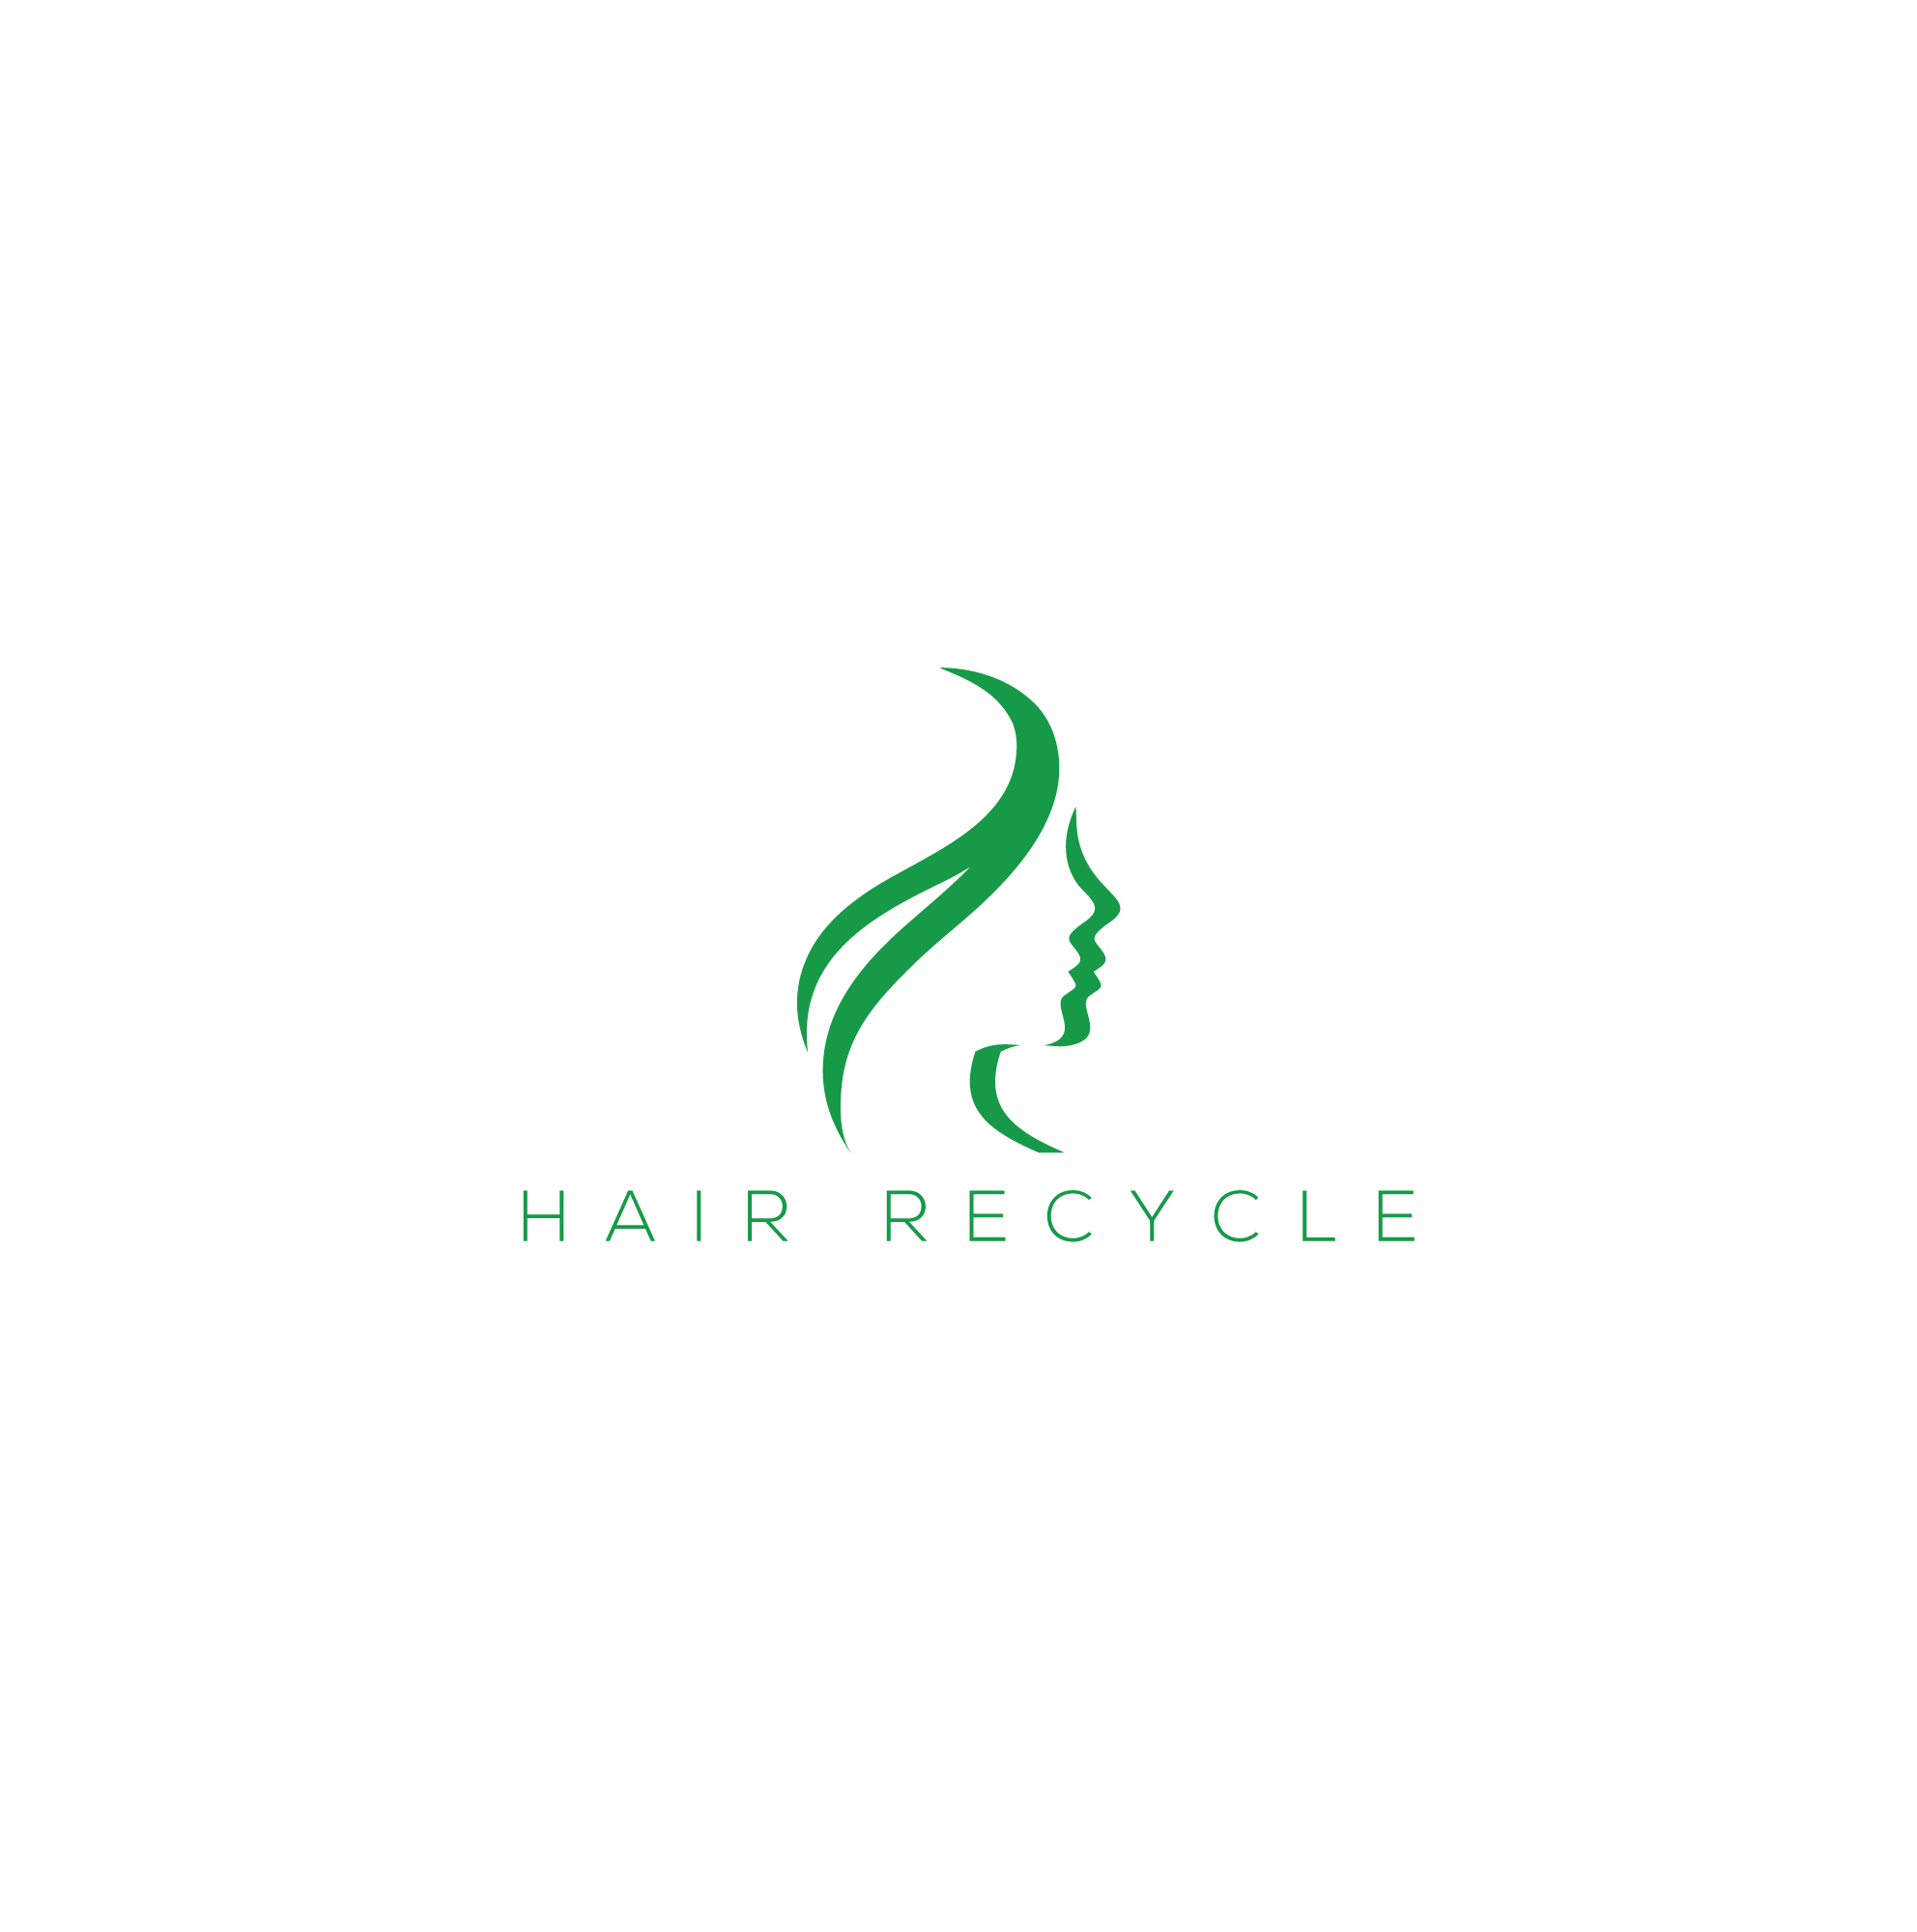 Hair Recycle